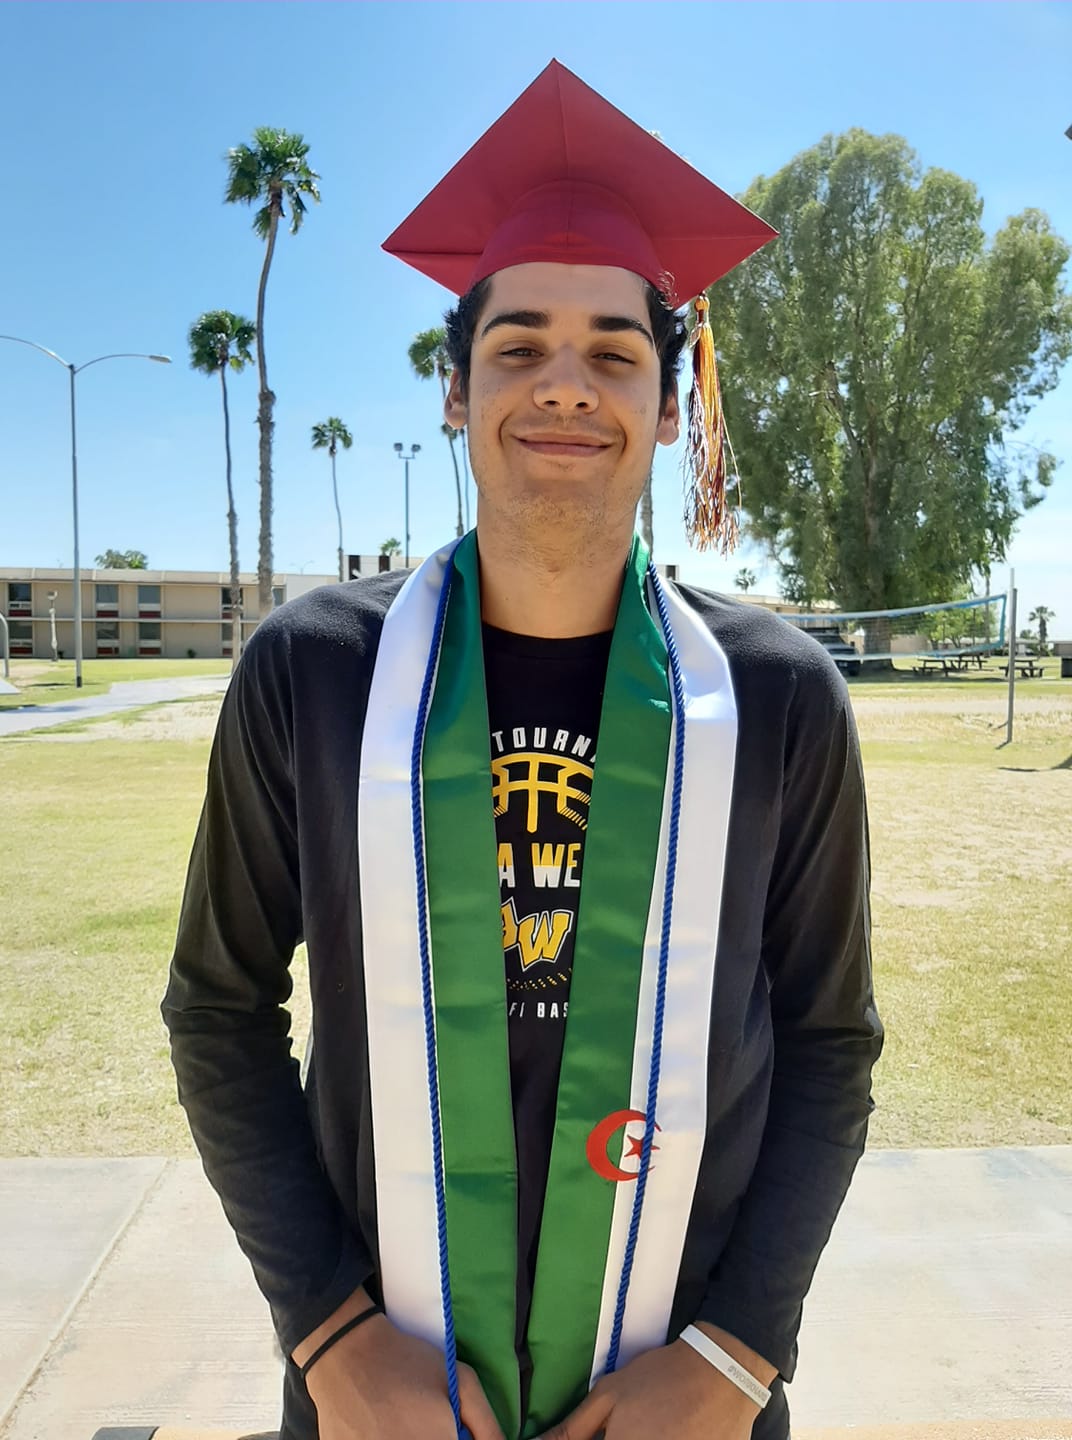 A graduate stands wearing sashes and a cap in front of the AWC dorms